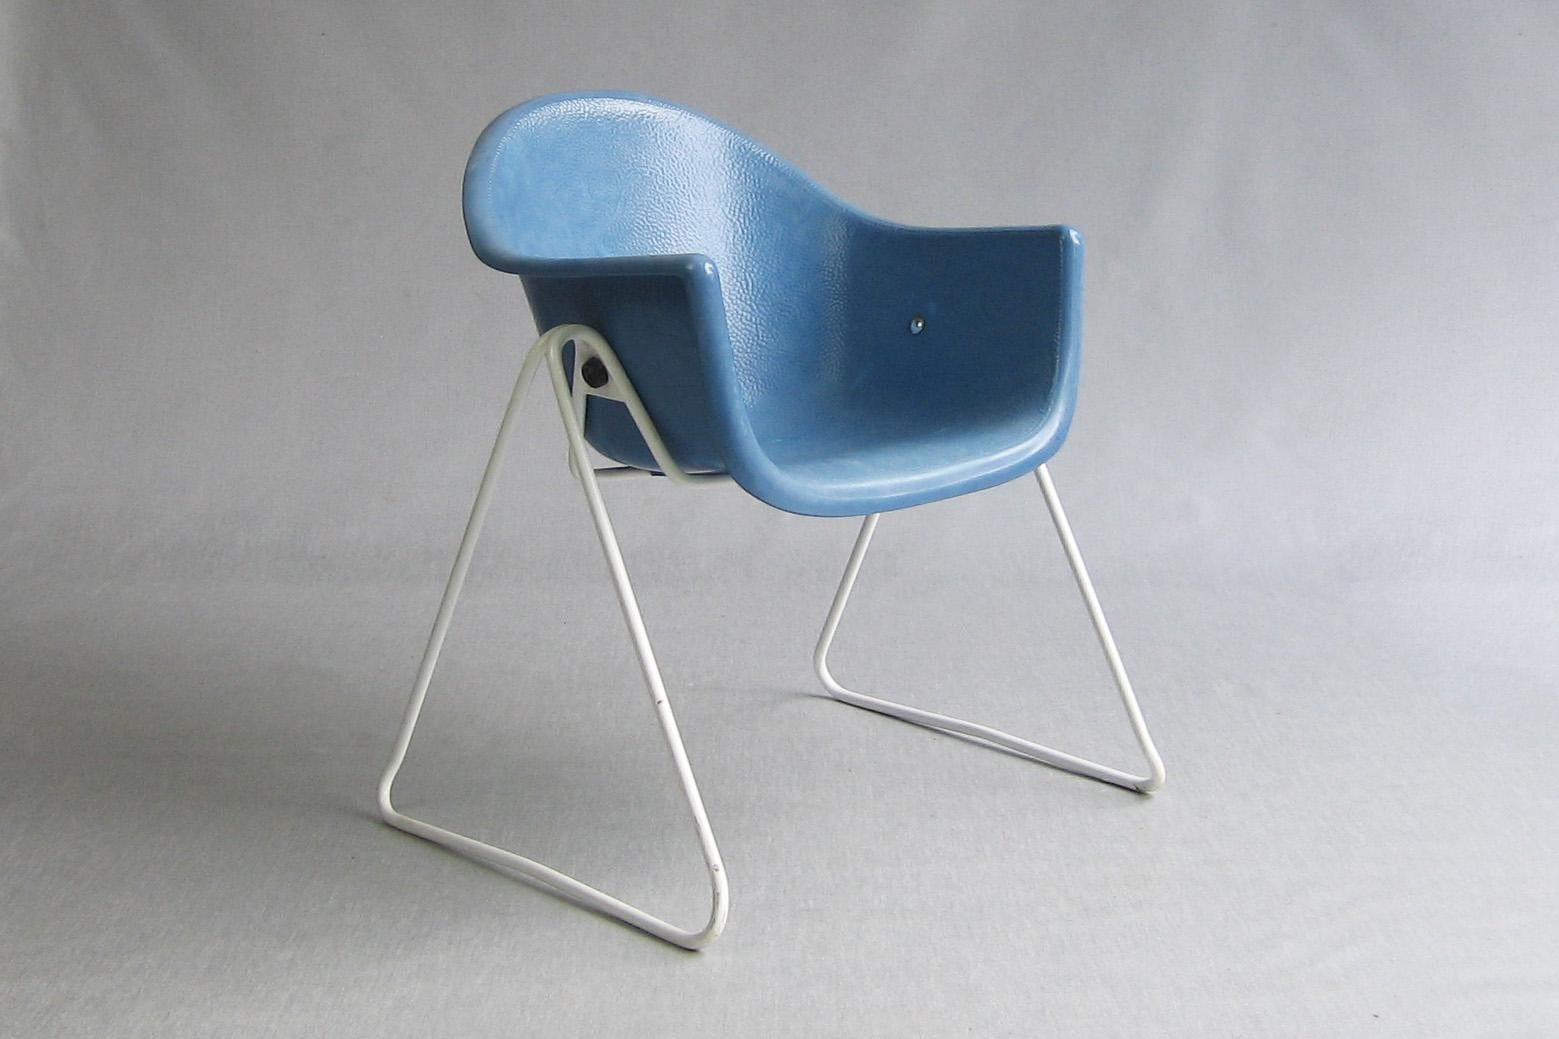 Pair of Walter Papst kids chairs, Wilkhahn, Germany 1961 - 1968 For Sale 7